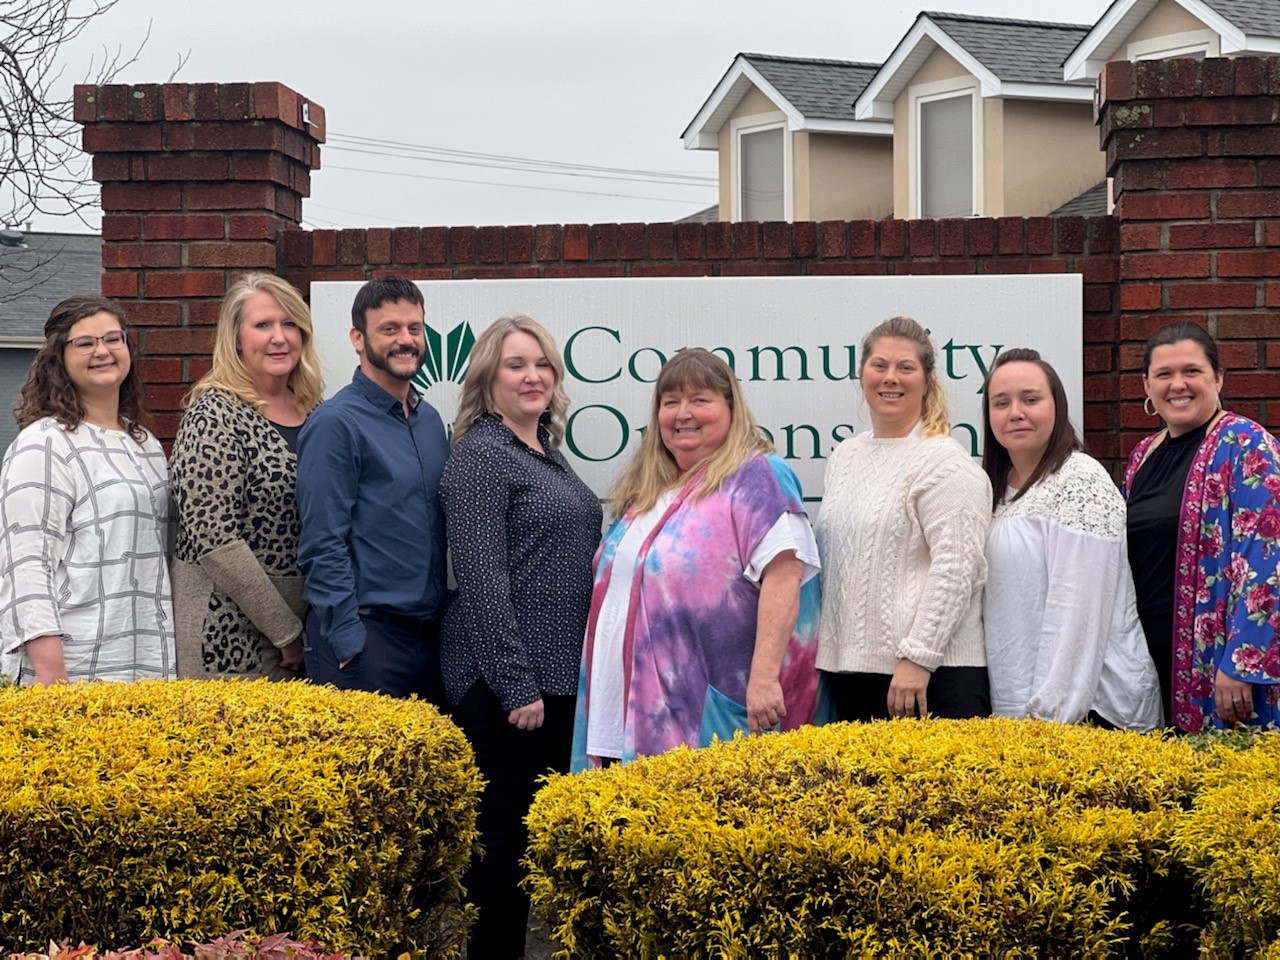 Community Options, Inc. of Cookeville, TN was established in 2004 to provide community-based options for residential and employment support services to individuals with disabilities living in Cookville, McMinnville and other local areas.